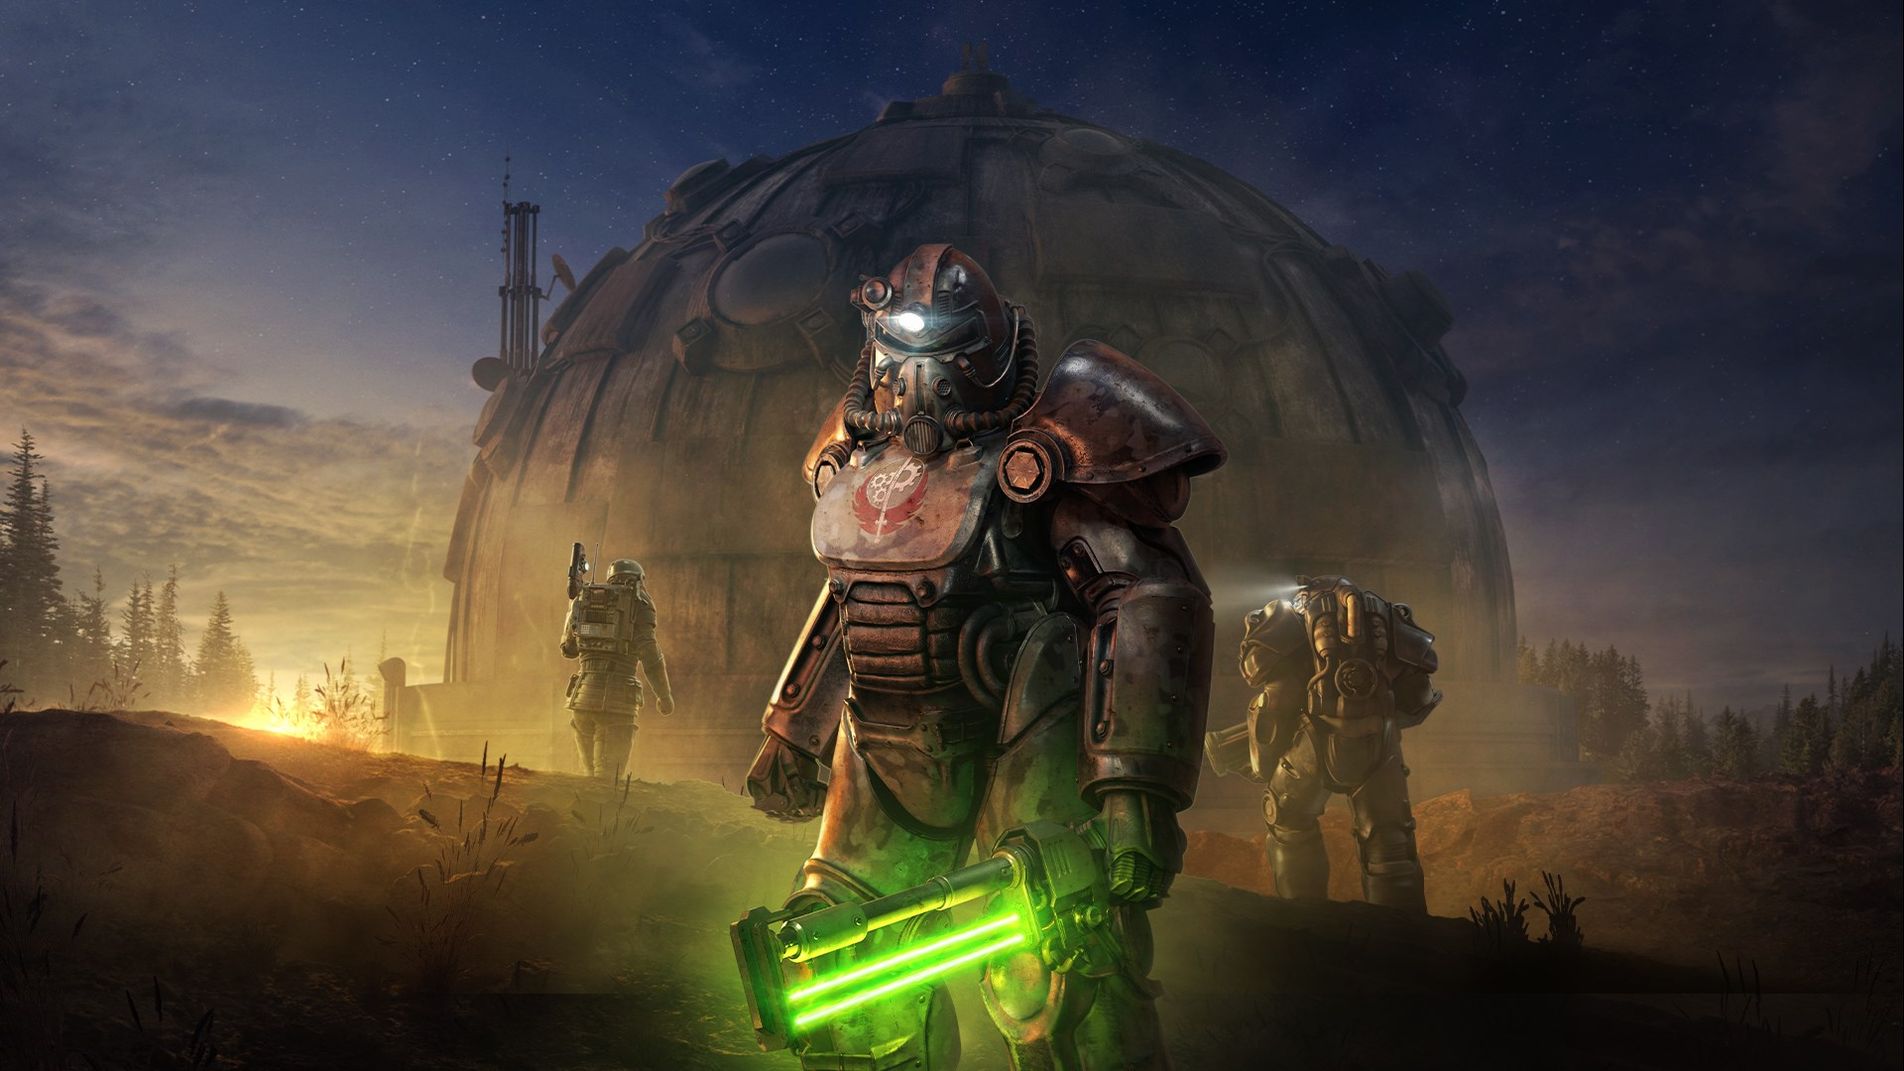 Compelling Story in Fallout Video Game Shows Main Character Entering Dangerous Sphere with Glowing Green Weapon